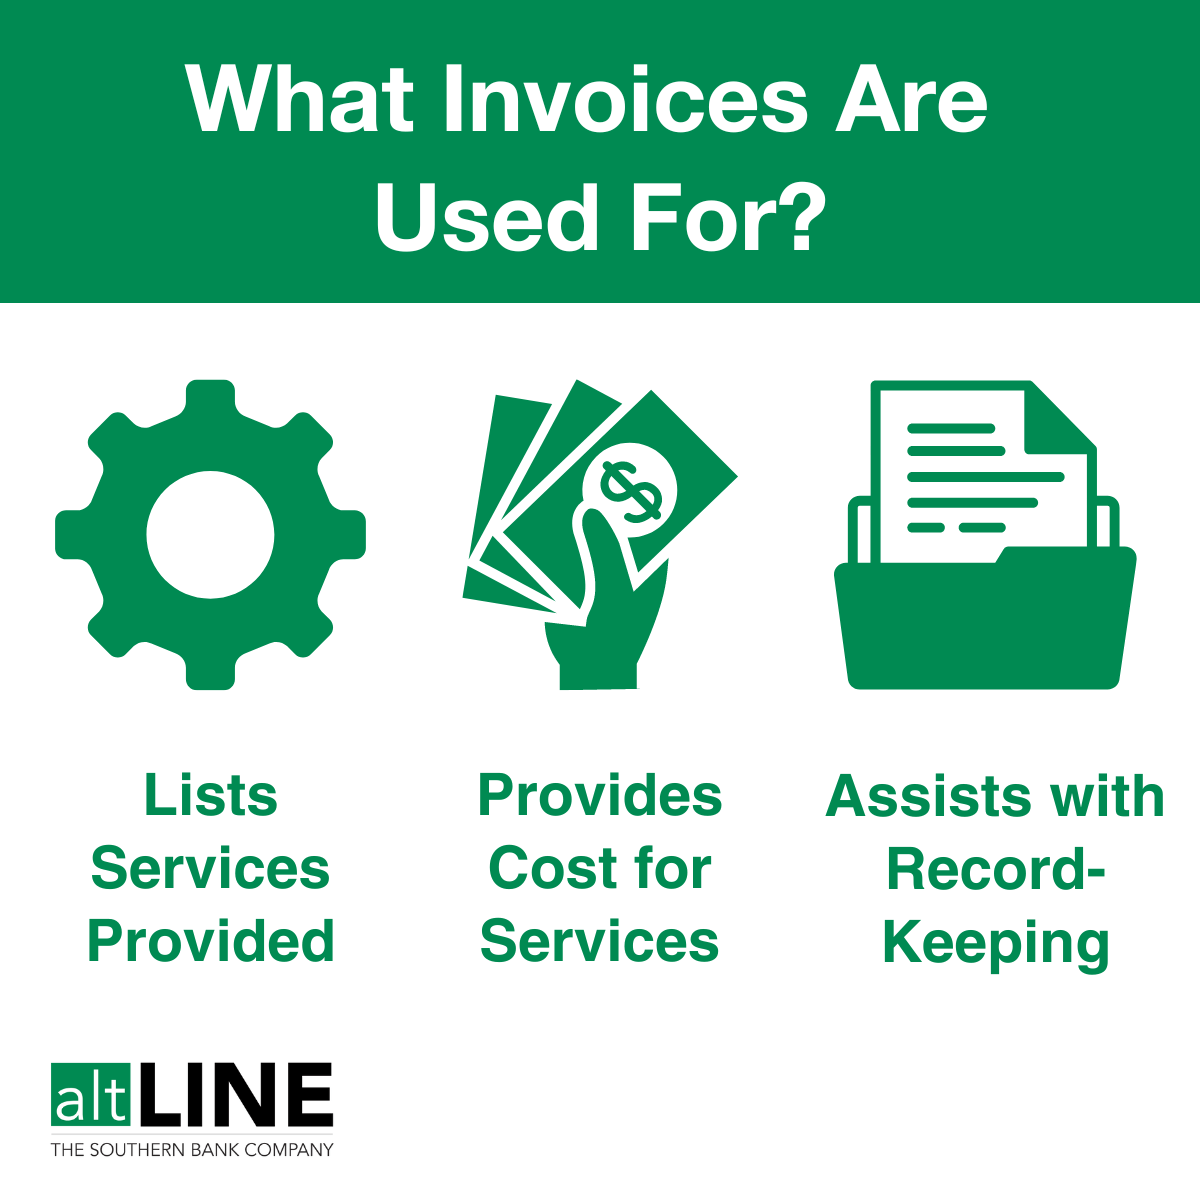 What Are Invoices Used For